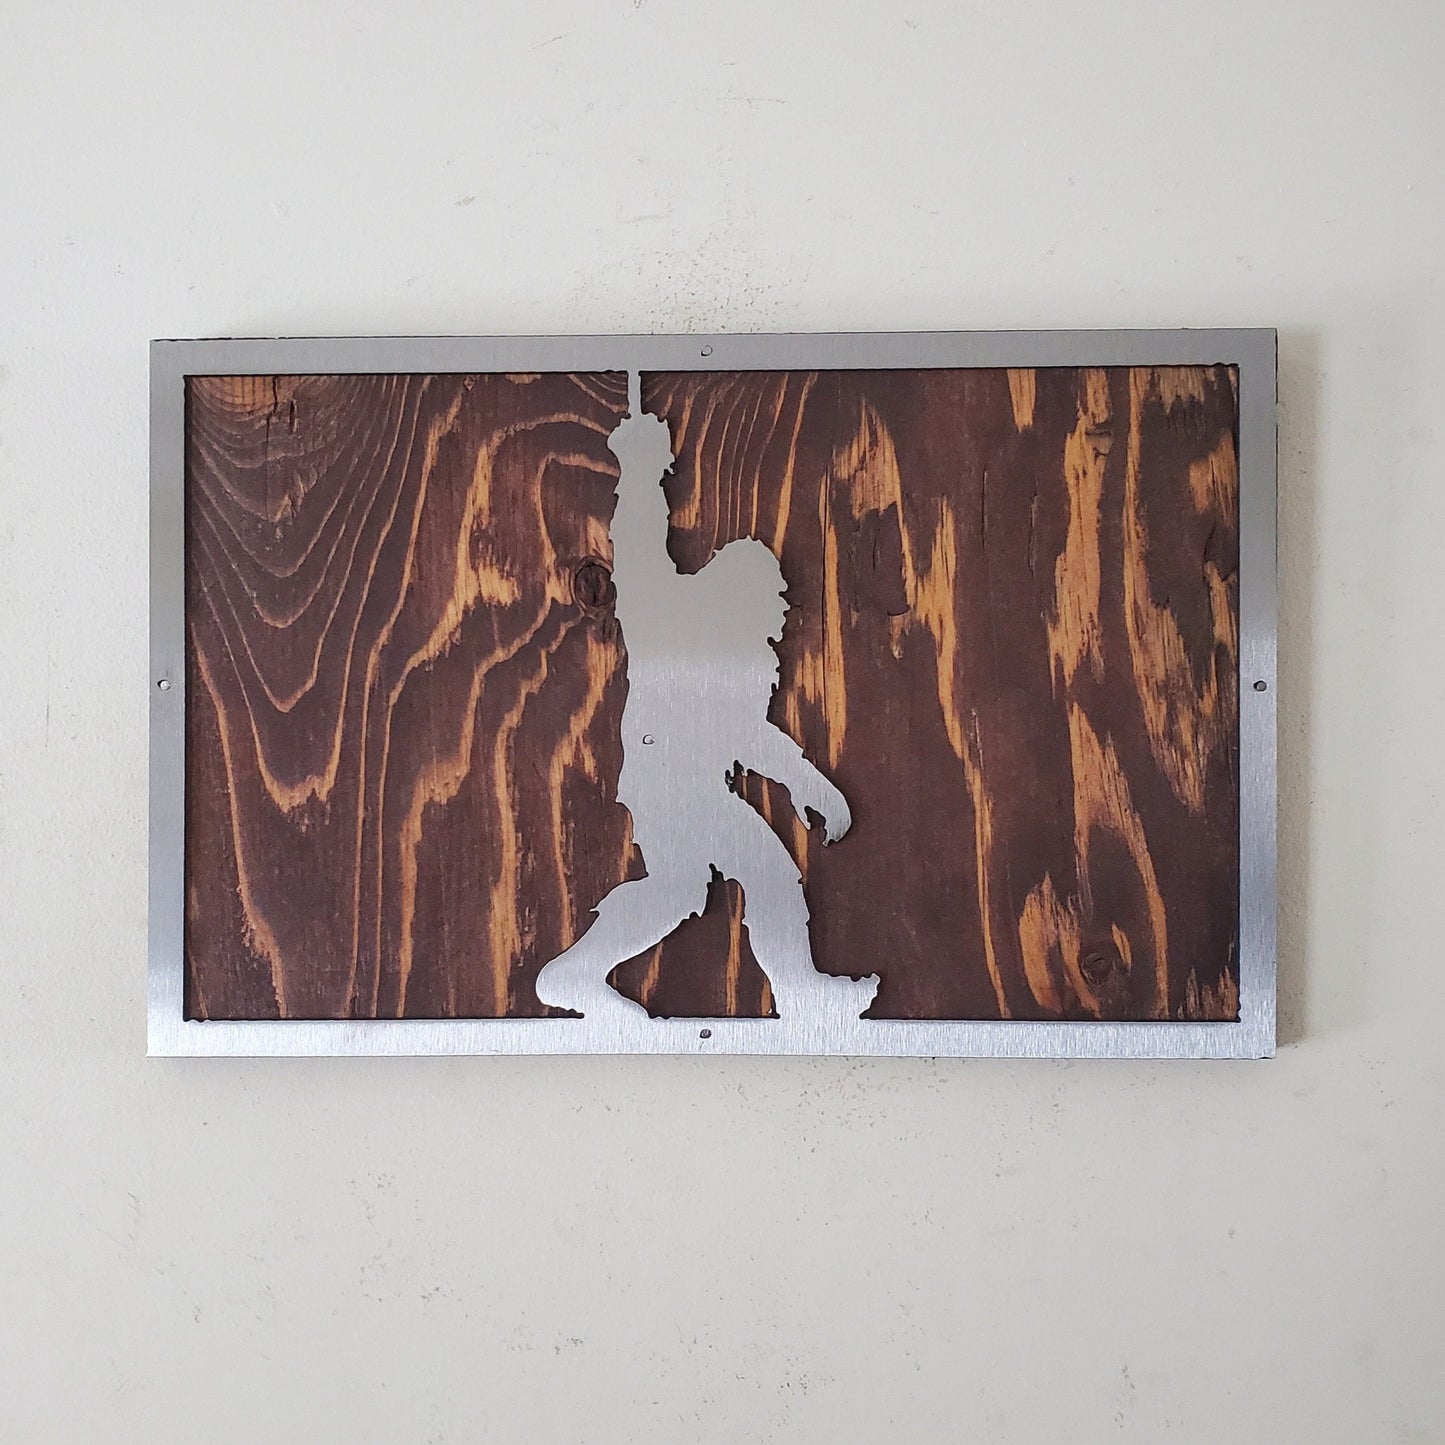 A unique metal art sculpture of bigfoot, mounted on a wooden background. The sculpture is made of high-quality metal and features a realistic design that captures the essence of the mythical creature.